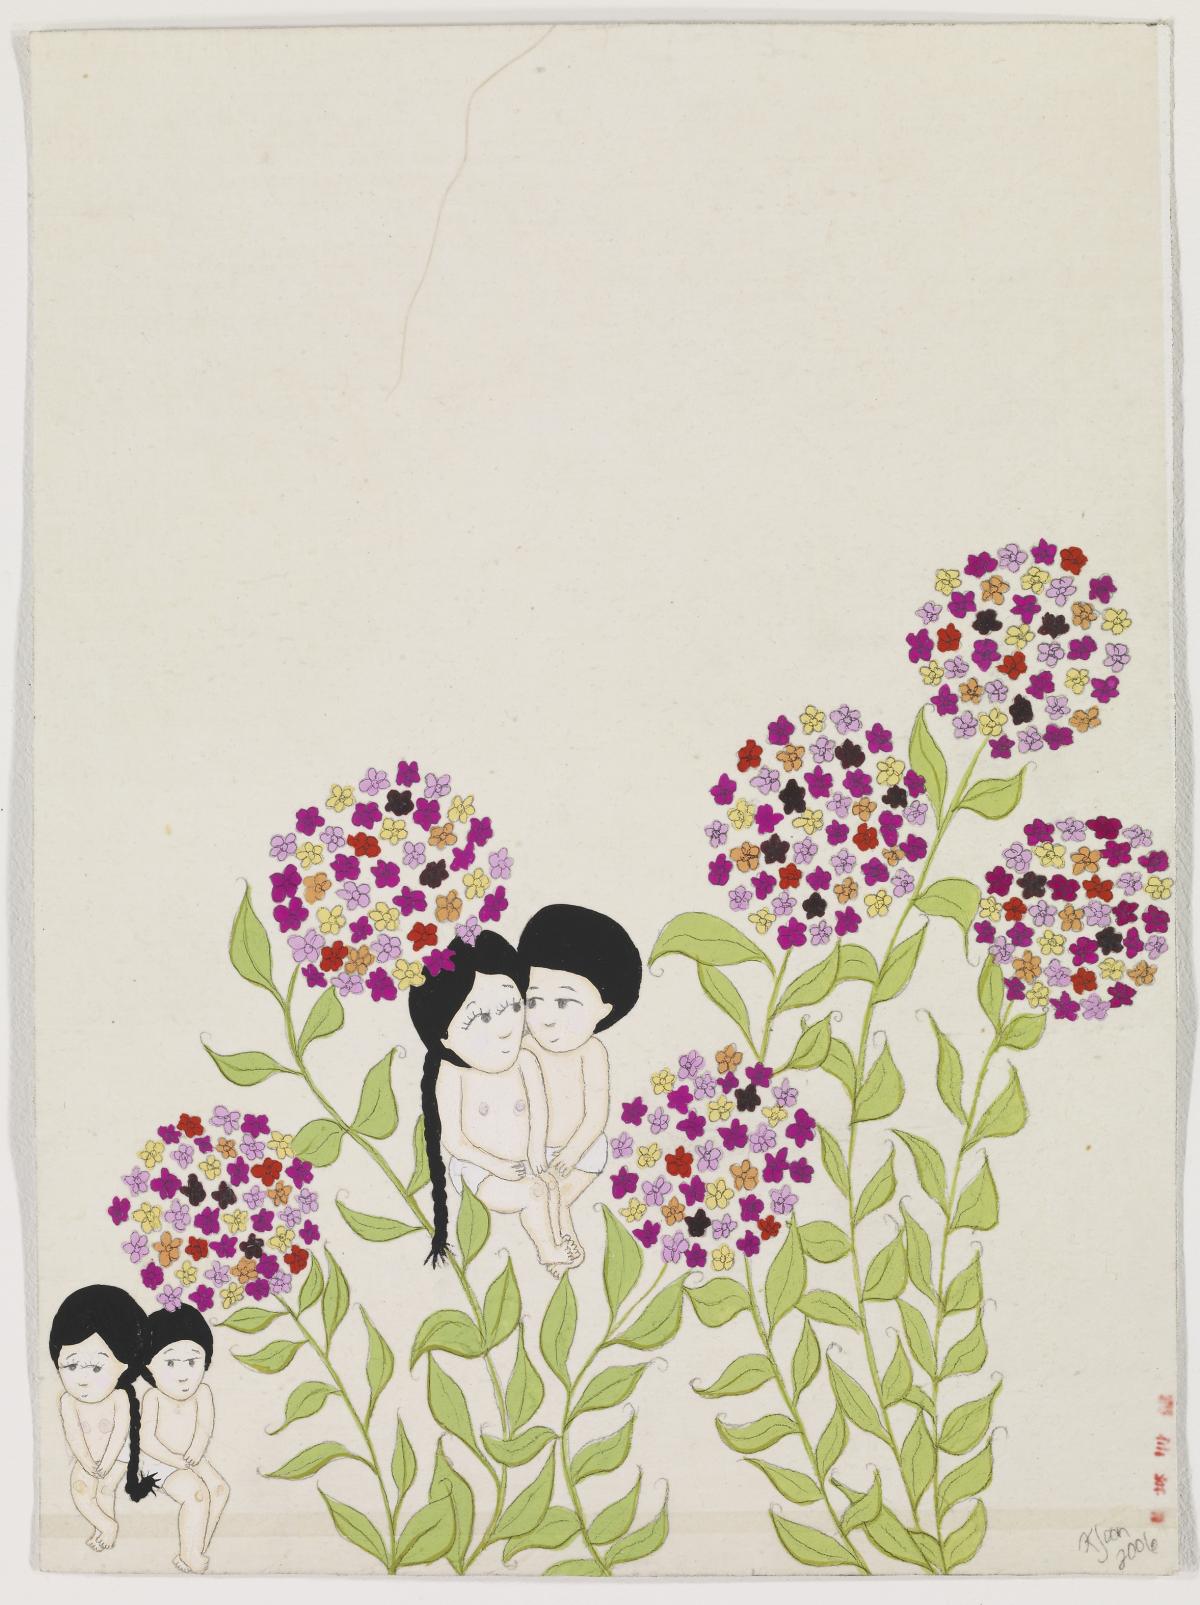 Artwork by Kyung Jeon titled Flirting, 2006, Gouache, graphite on rice paper on linen, 13 x 9.5 inches, 33 x 24.1 cm